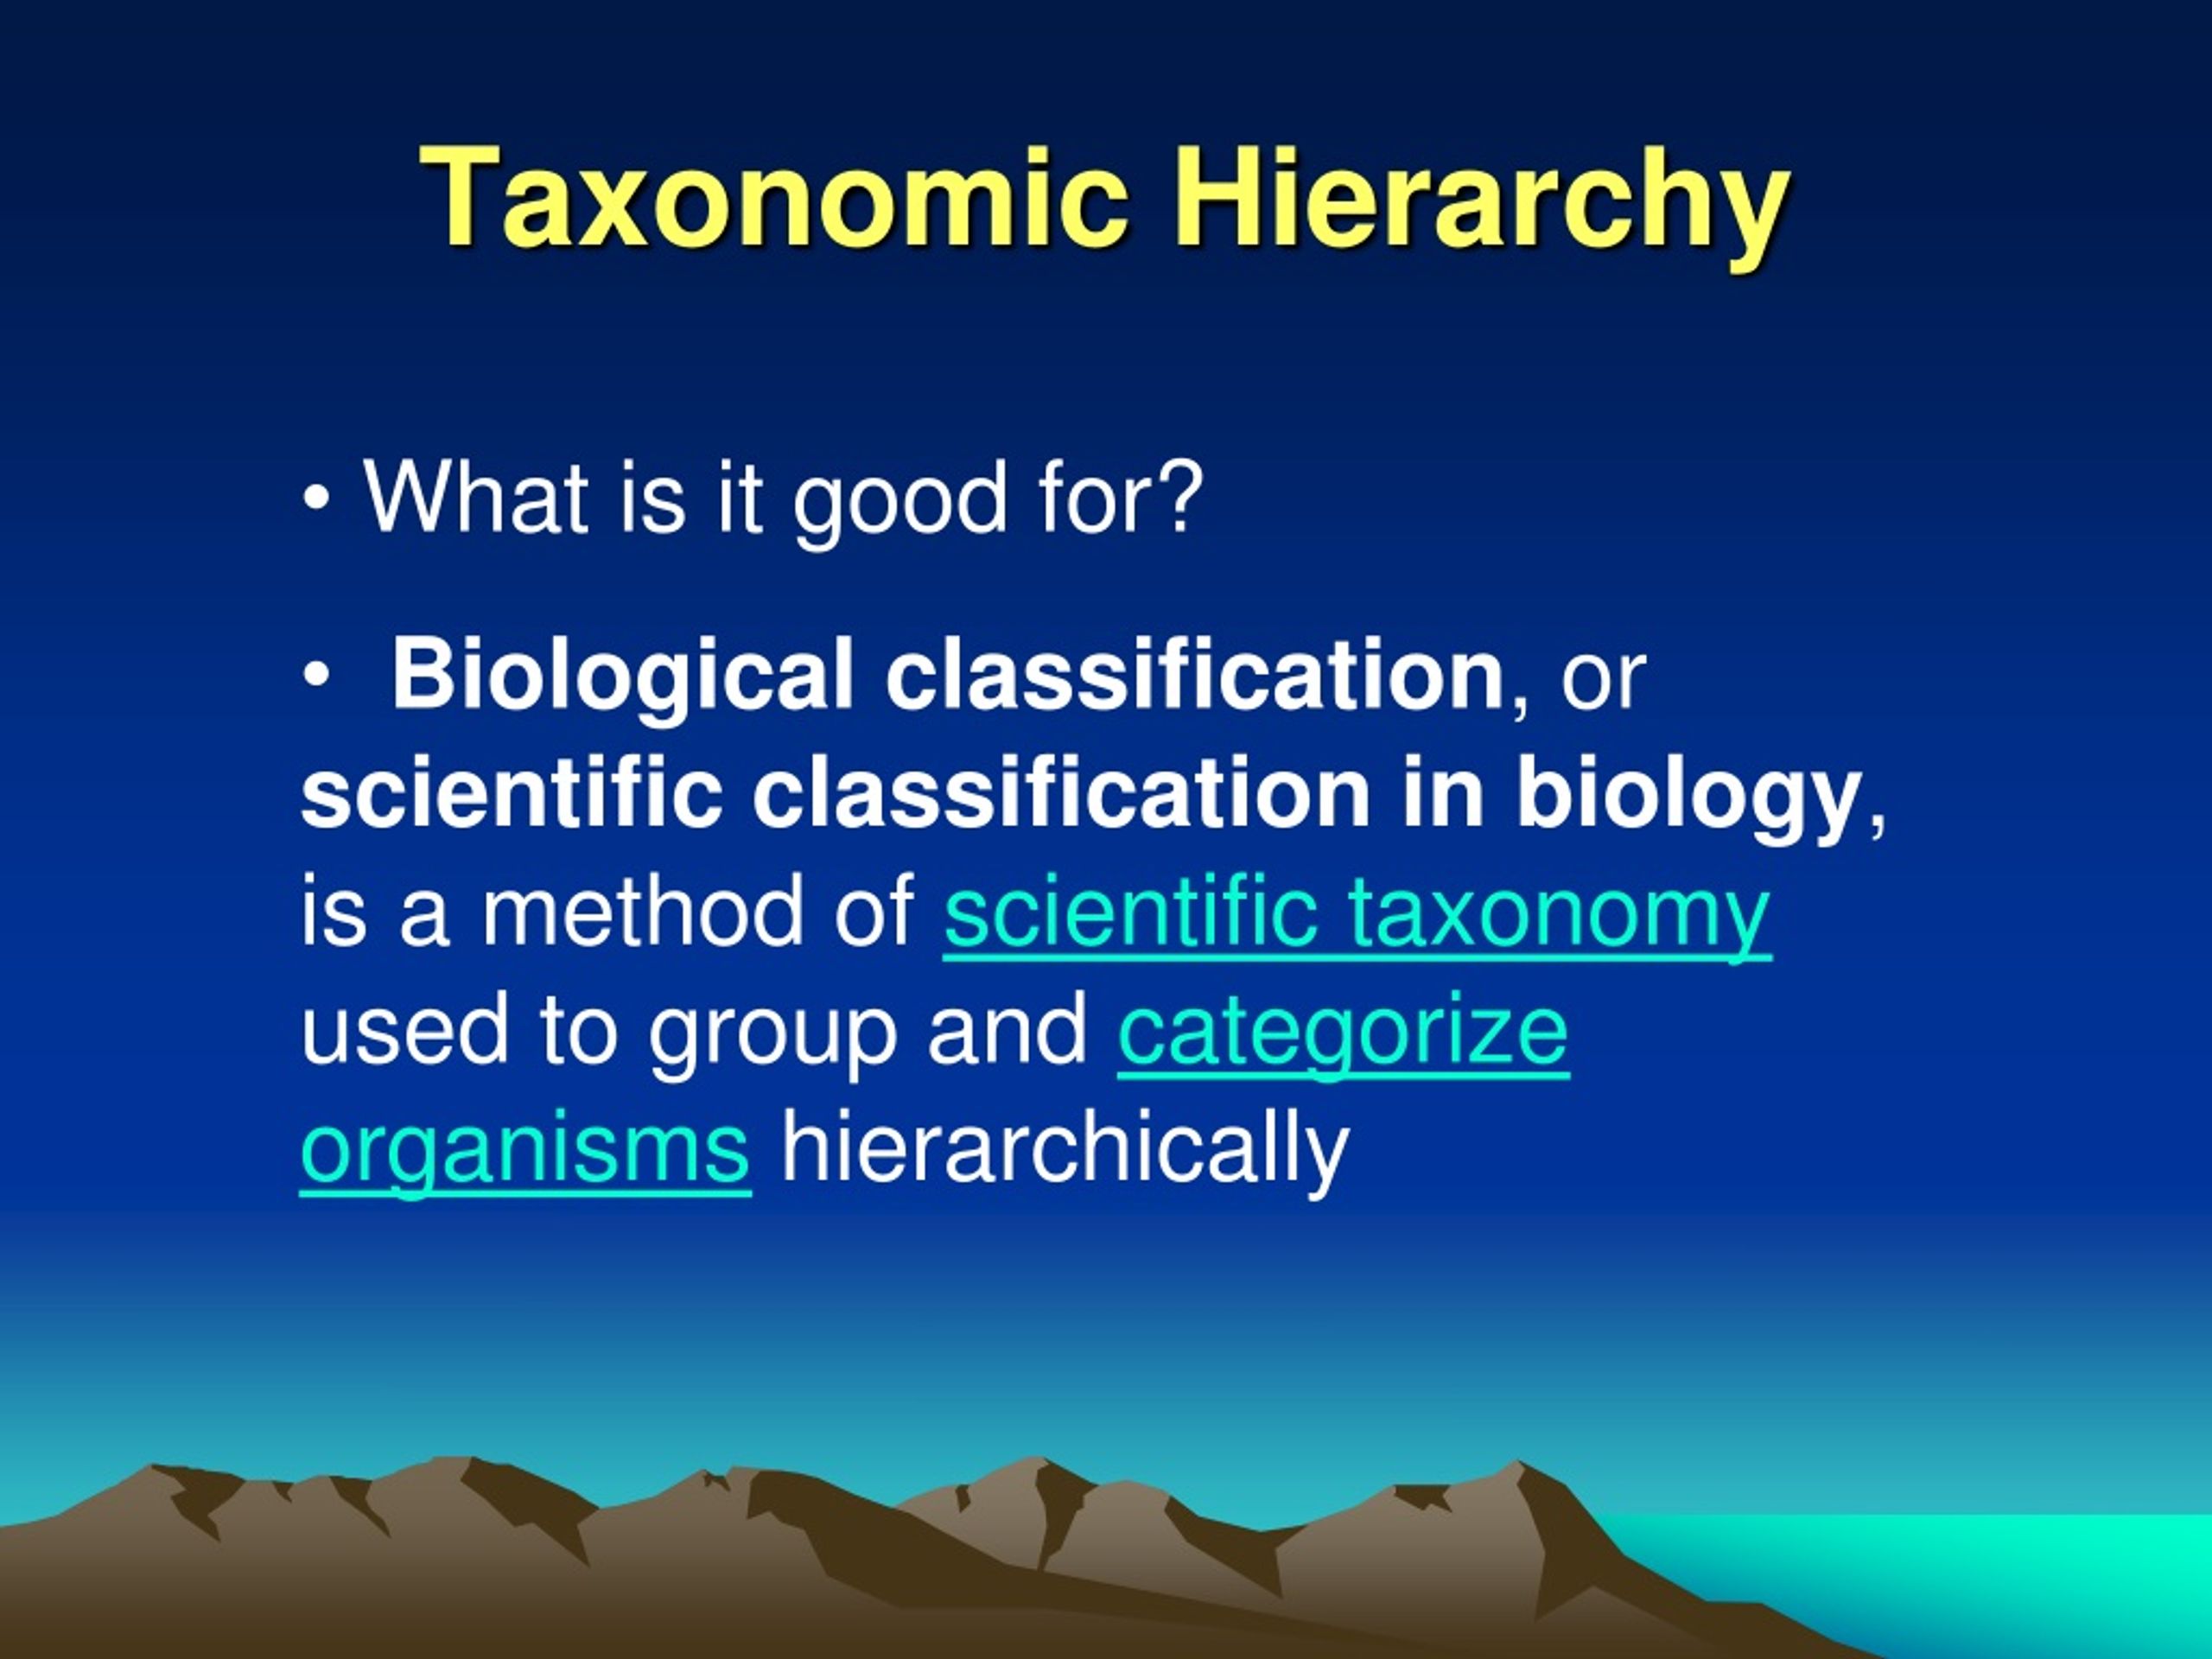 PPT - Science Olympiad Fossils Division B 2015 6 - Taxonomic hierarchy ...